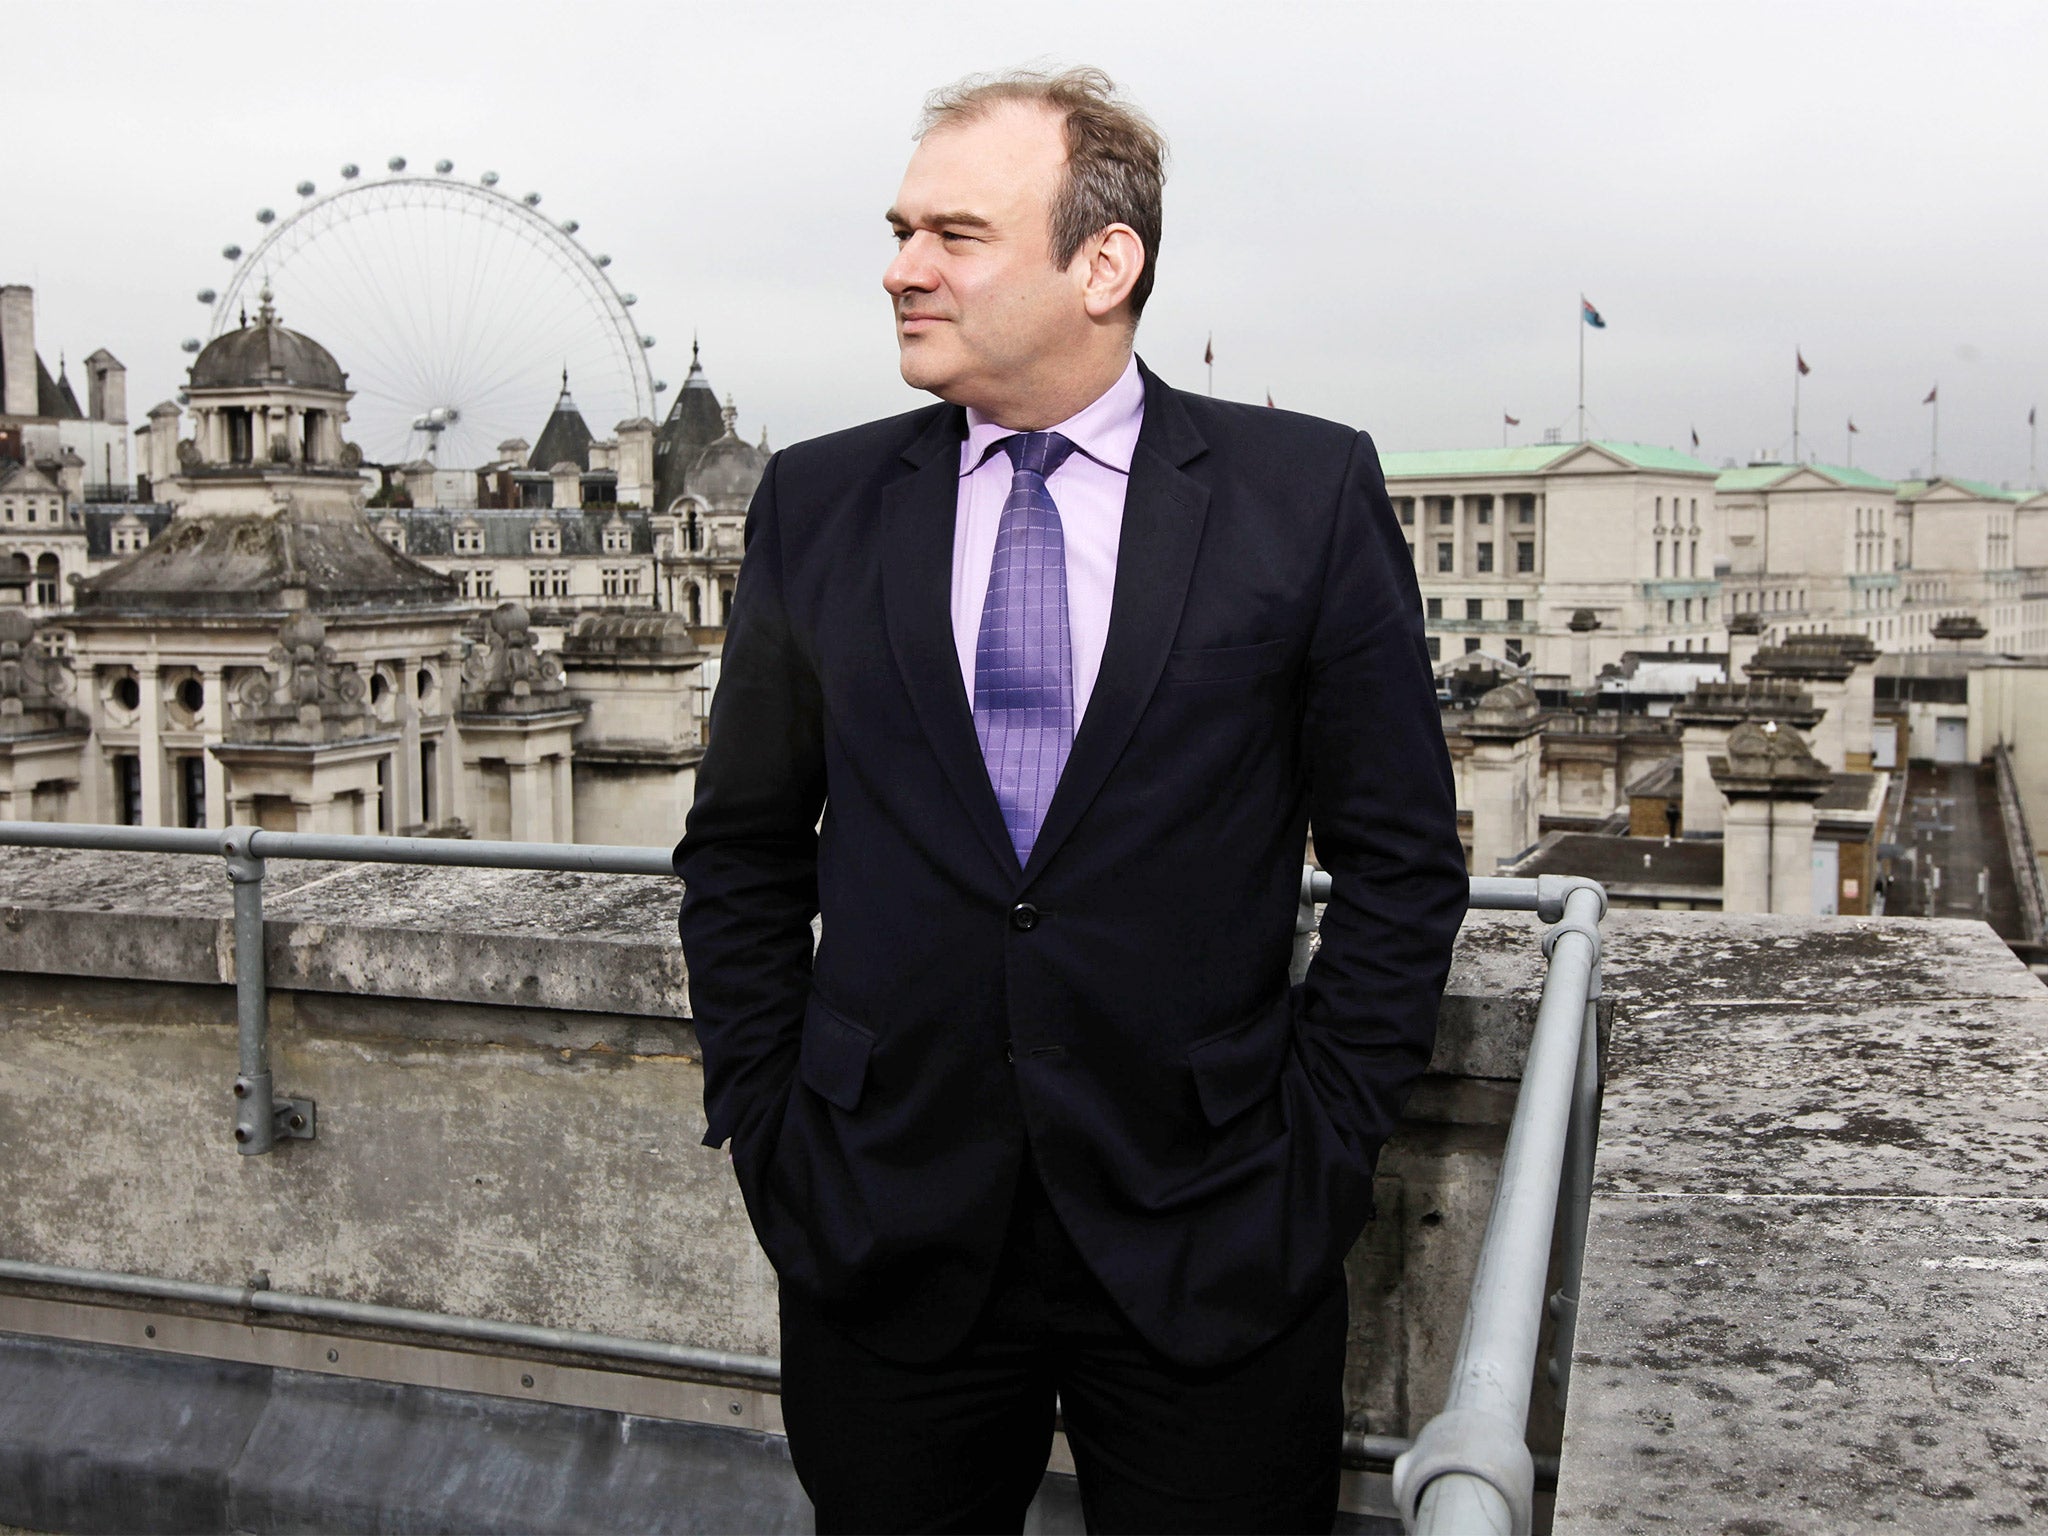 Ed Davey is proud of what he has achieved in the role over the past three years